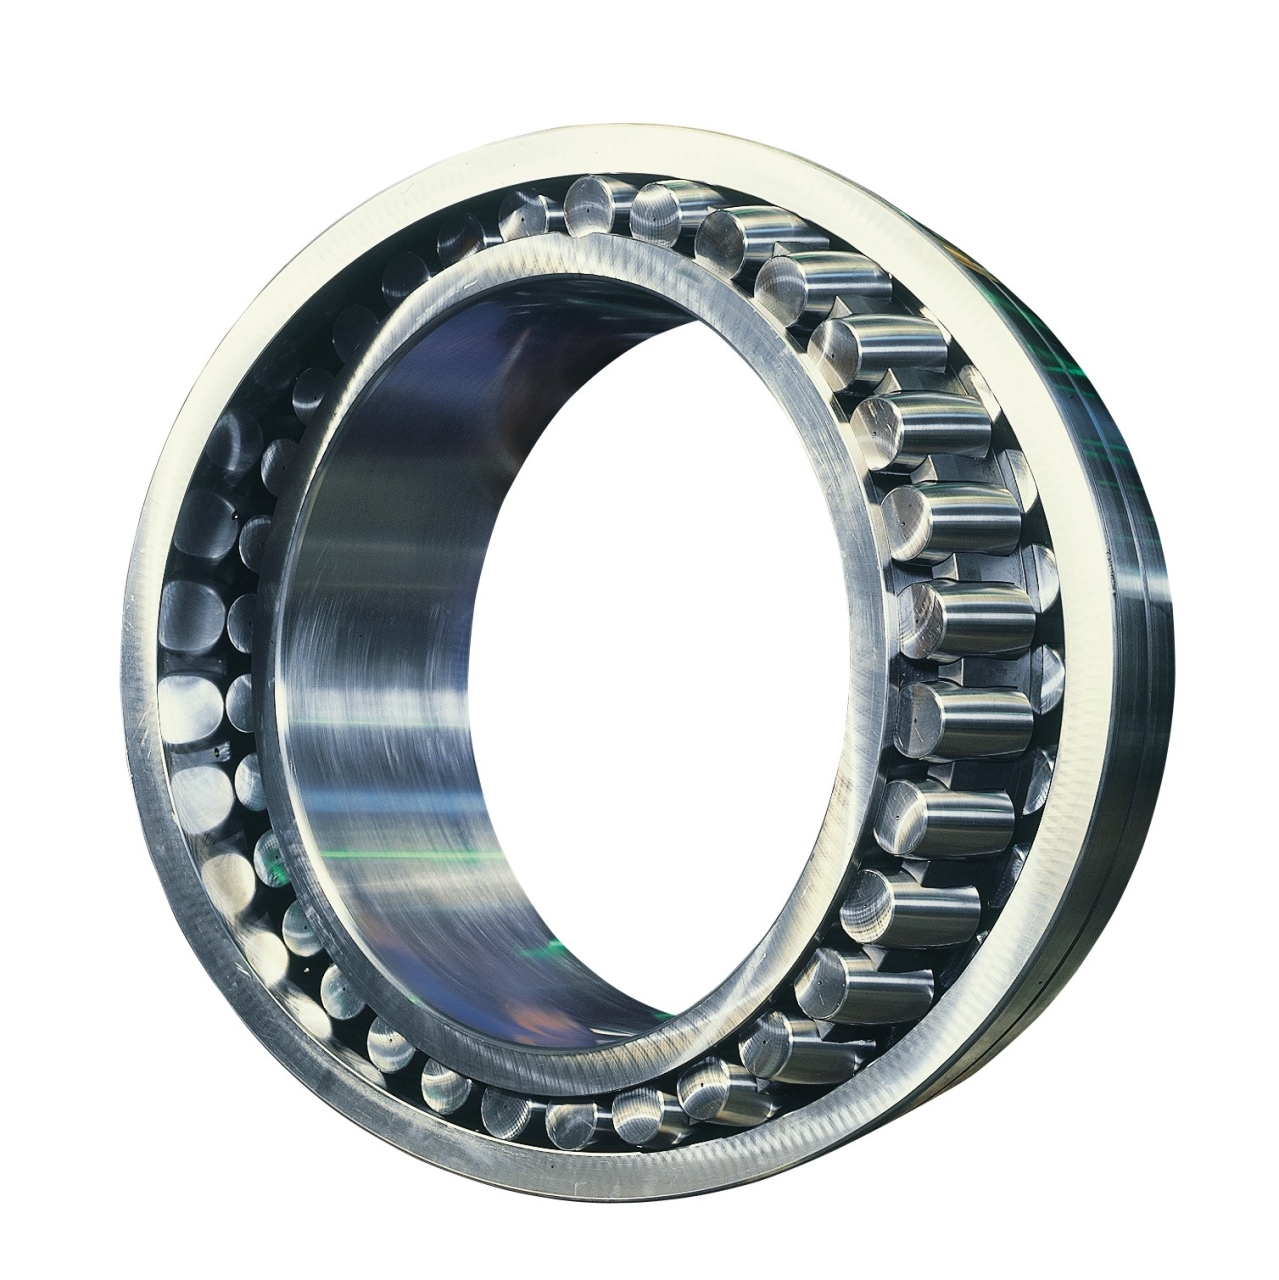 Extra-large sized spherical roller bearing for paper mill application